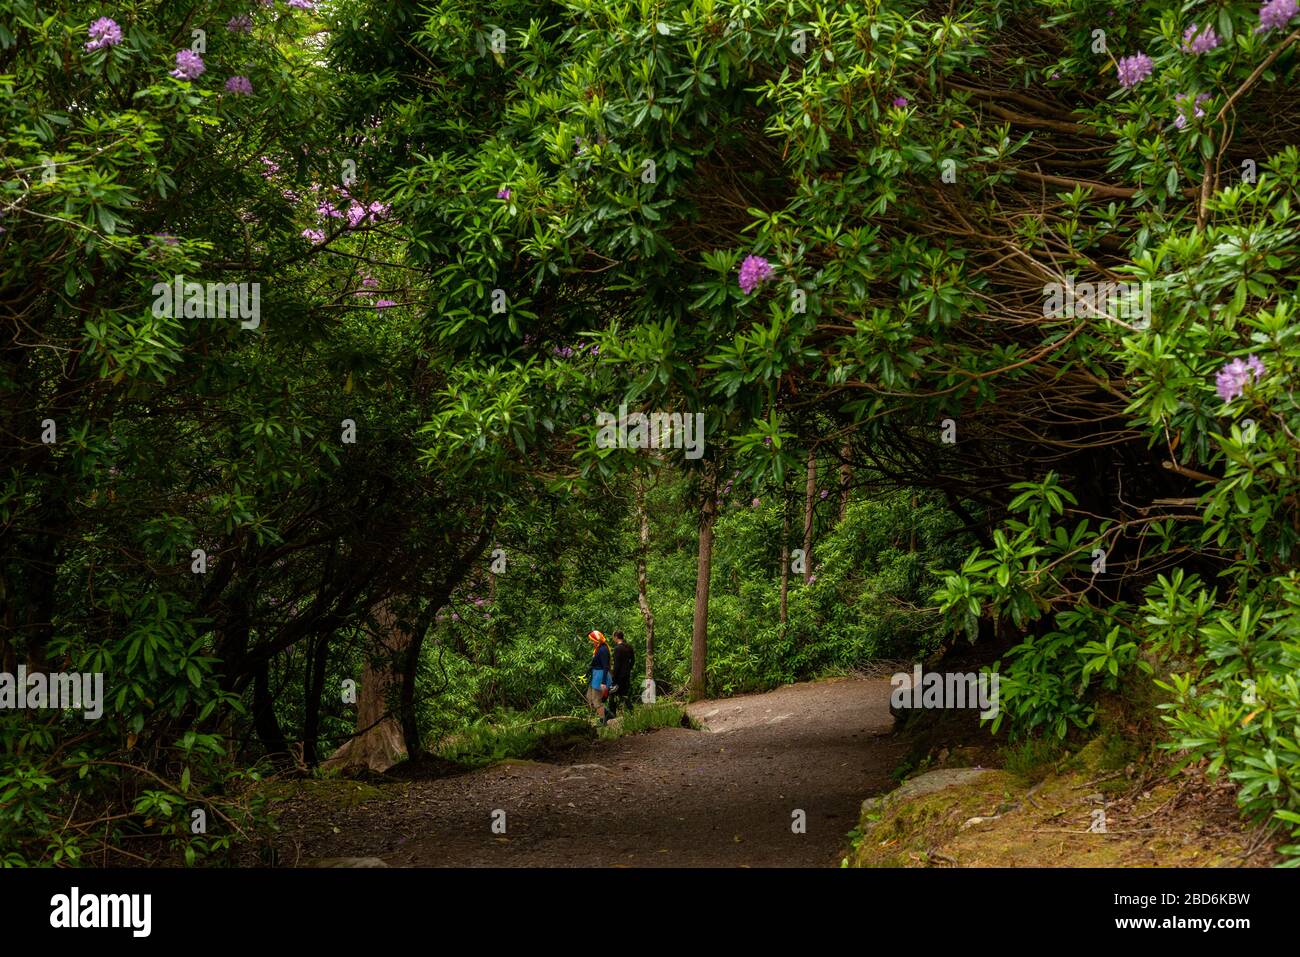 A couple walking under a canopy of blooming Rhododendron in Killarney National Park, County Kerry, Ireland. Stock Photo